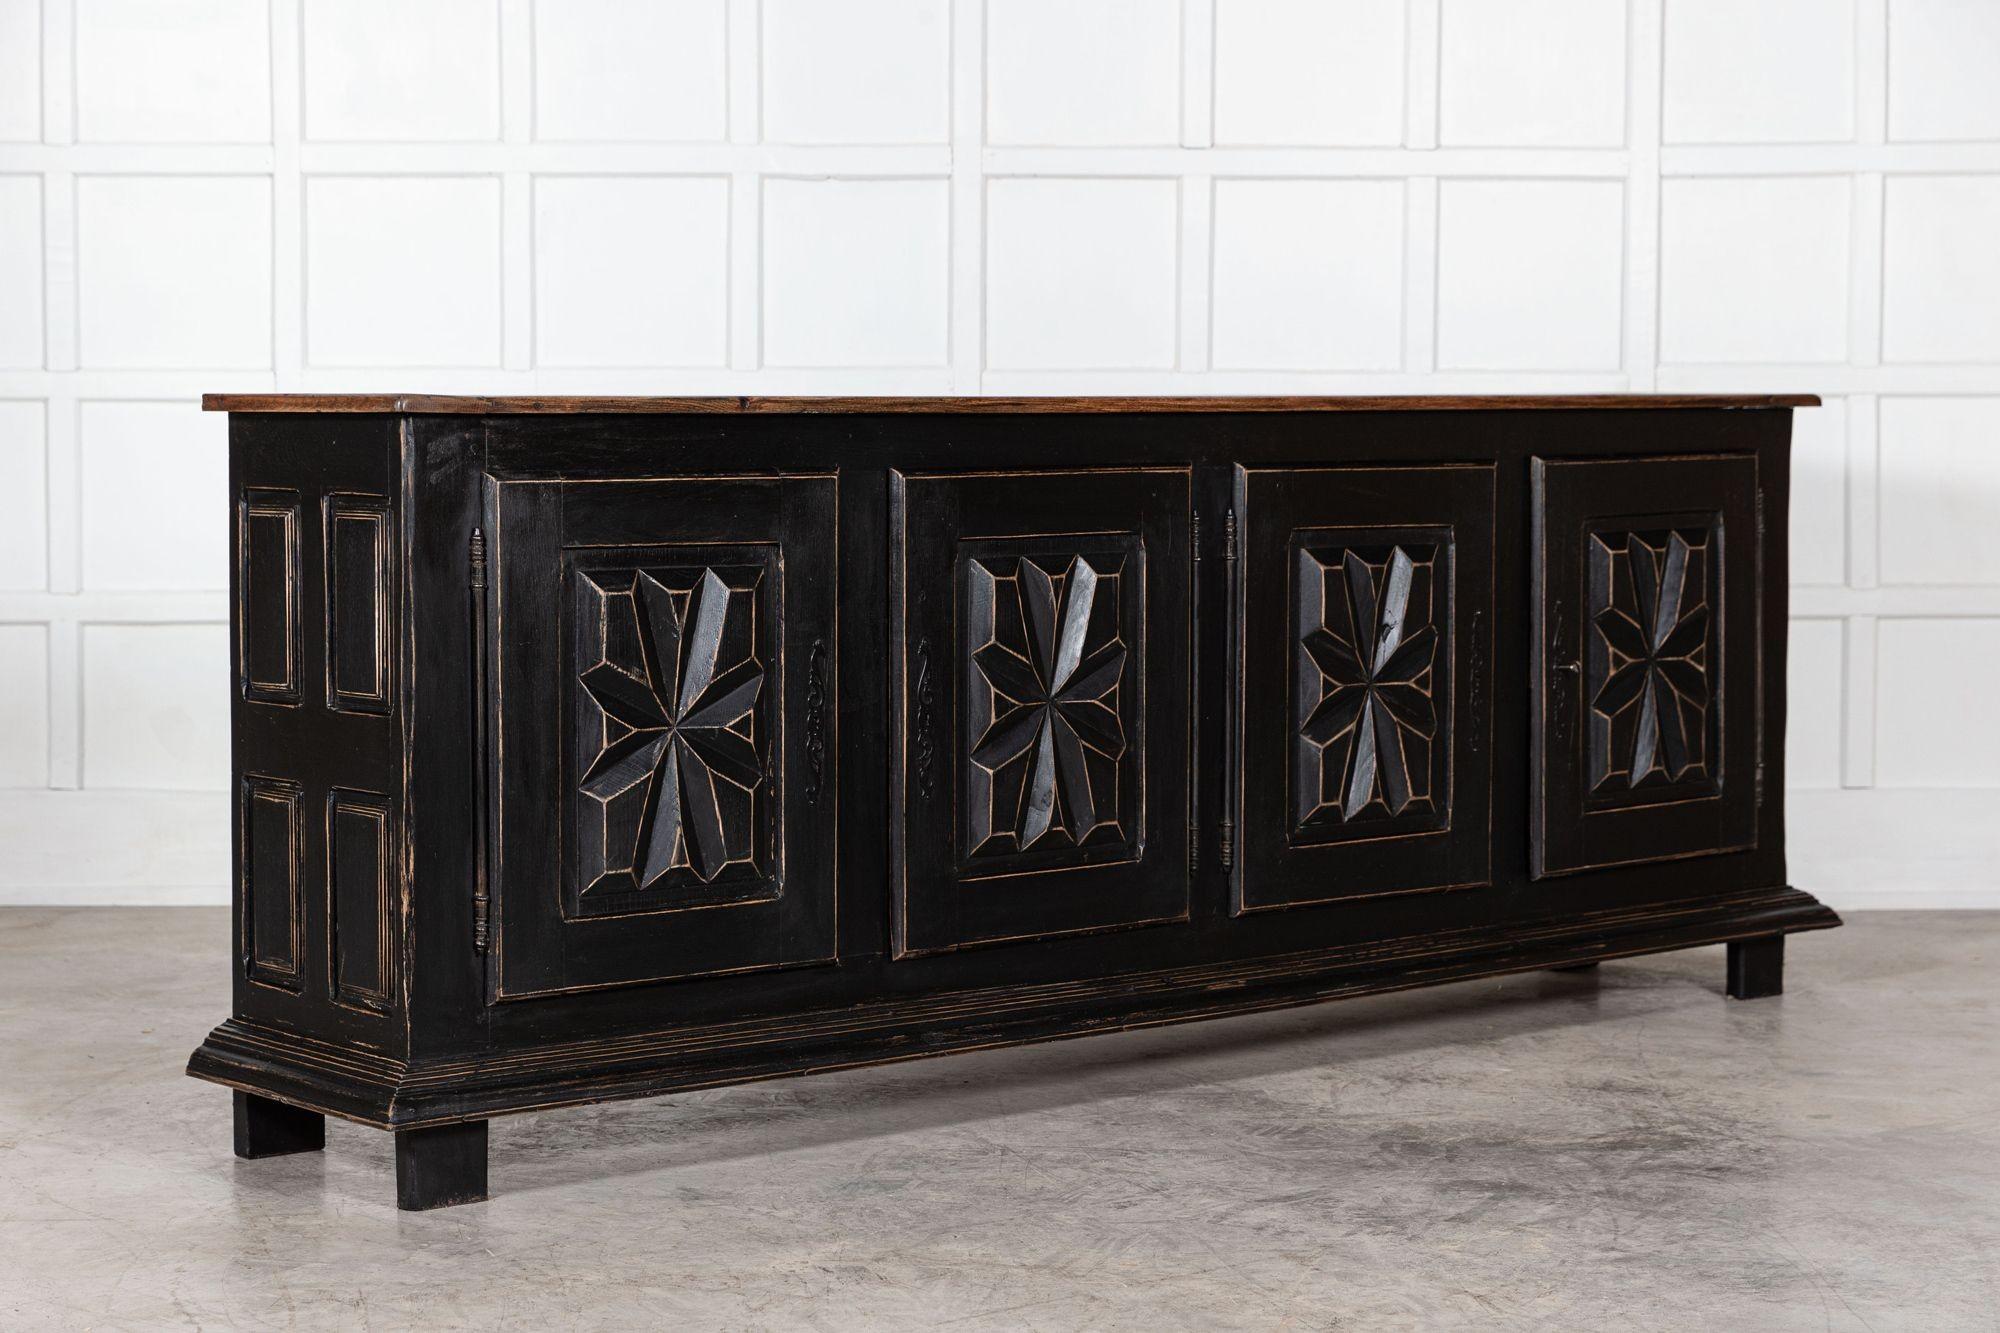 circa mid 20thC
Monumental Ebonised French Oak Enfilade Buffet
We can also customise existing pieces to suit your scheme/requirements. We have our own workshop, restorers and finishers. From adapting to finishing pieces including, stripping,